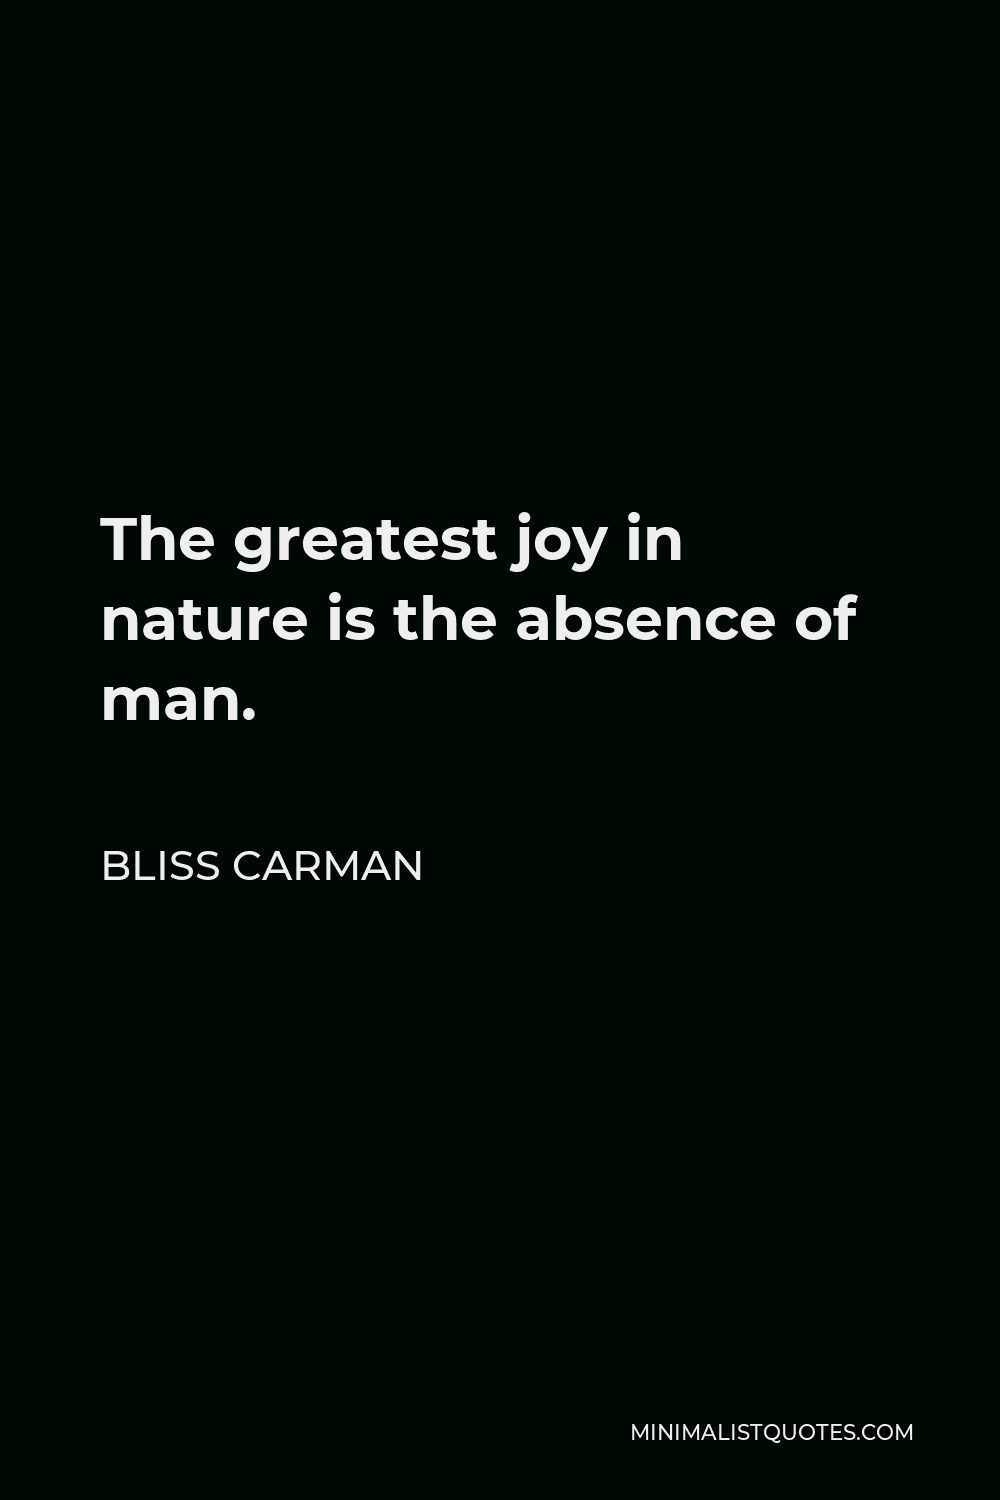 Bliss Carman Quote - The greatest joy in nature is the absence of man.